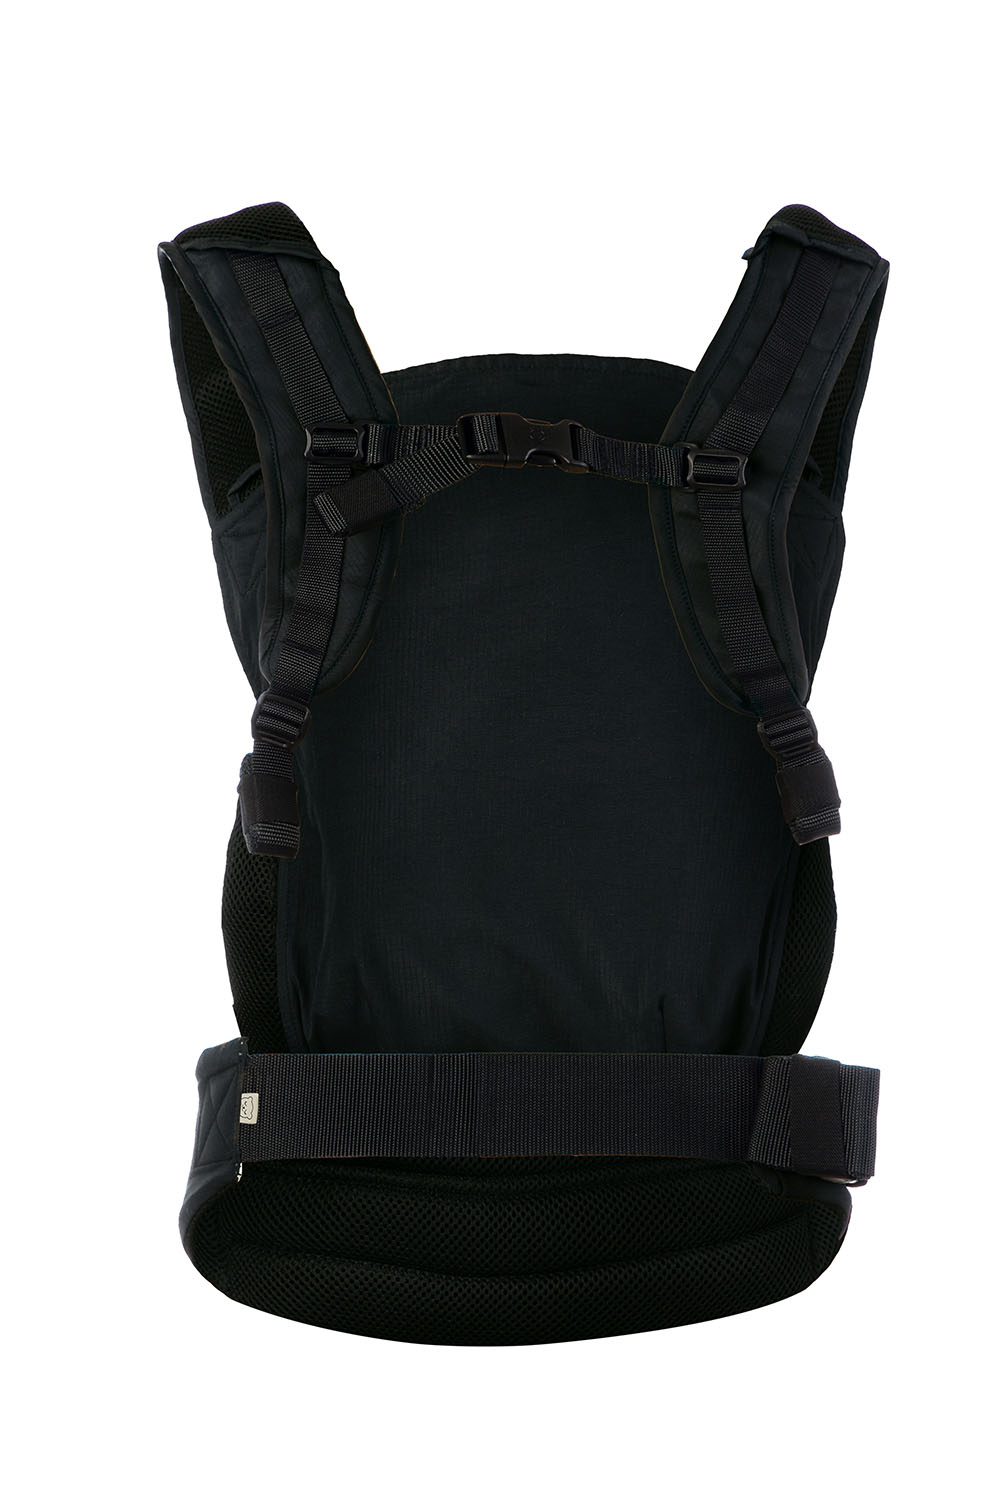 Black - Tula Lite Baby Carrier